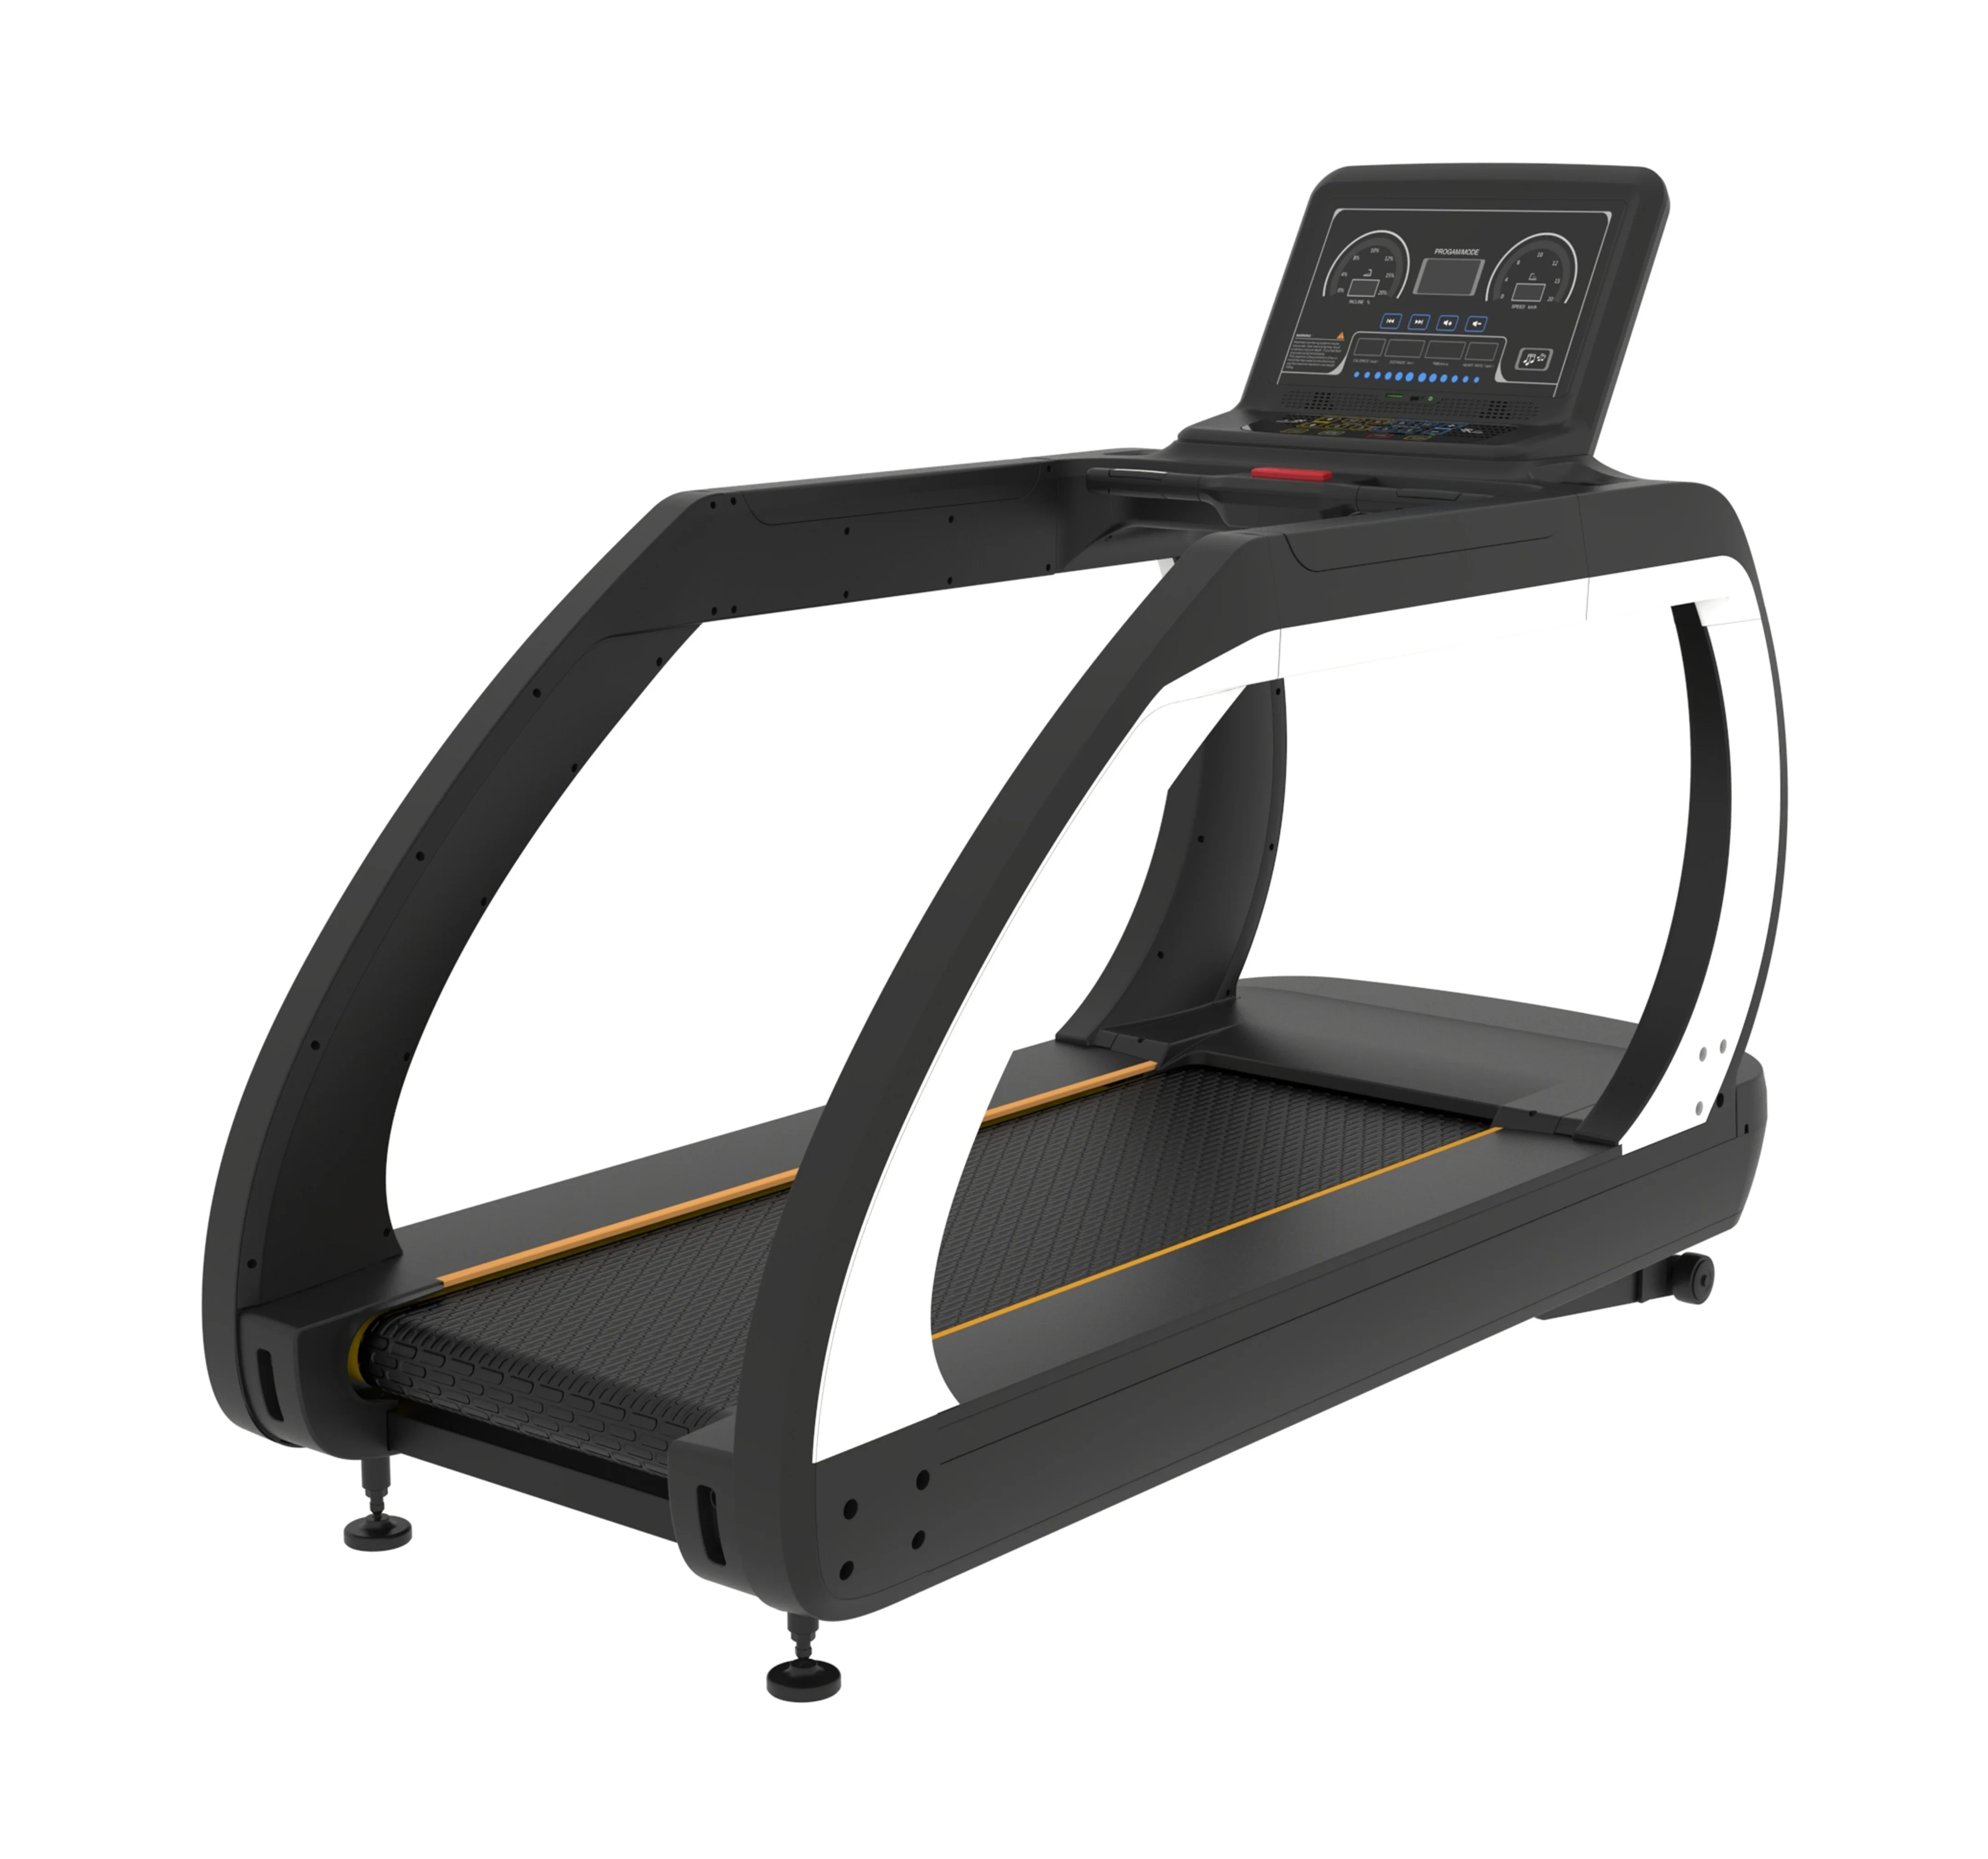 

2019 new design hot sale 200kg commercial gym fitness treadmill for gym exercise use with touch screen, As required